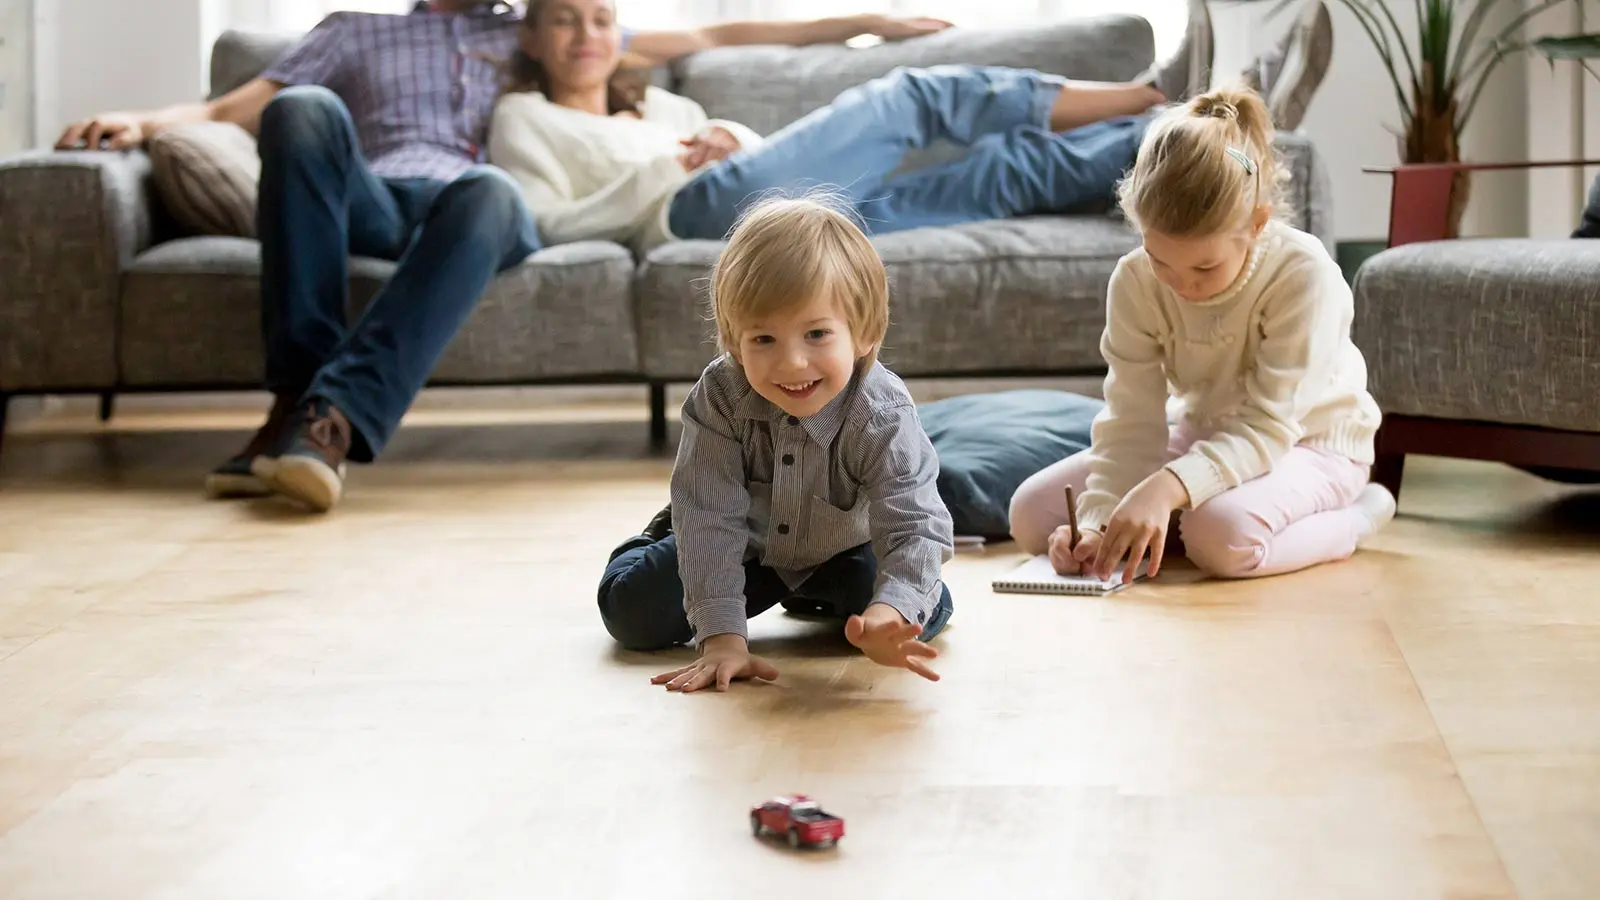 How to keep your kids from ruining the couch when they play with their toys